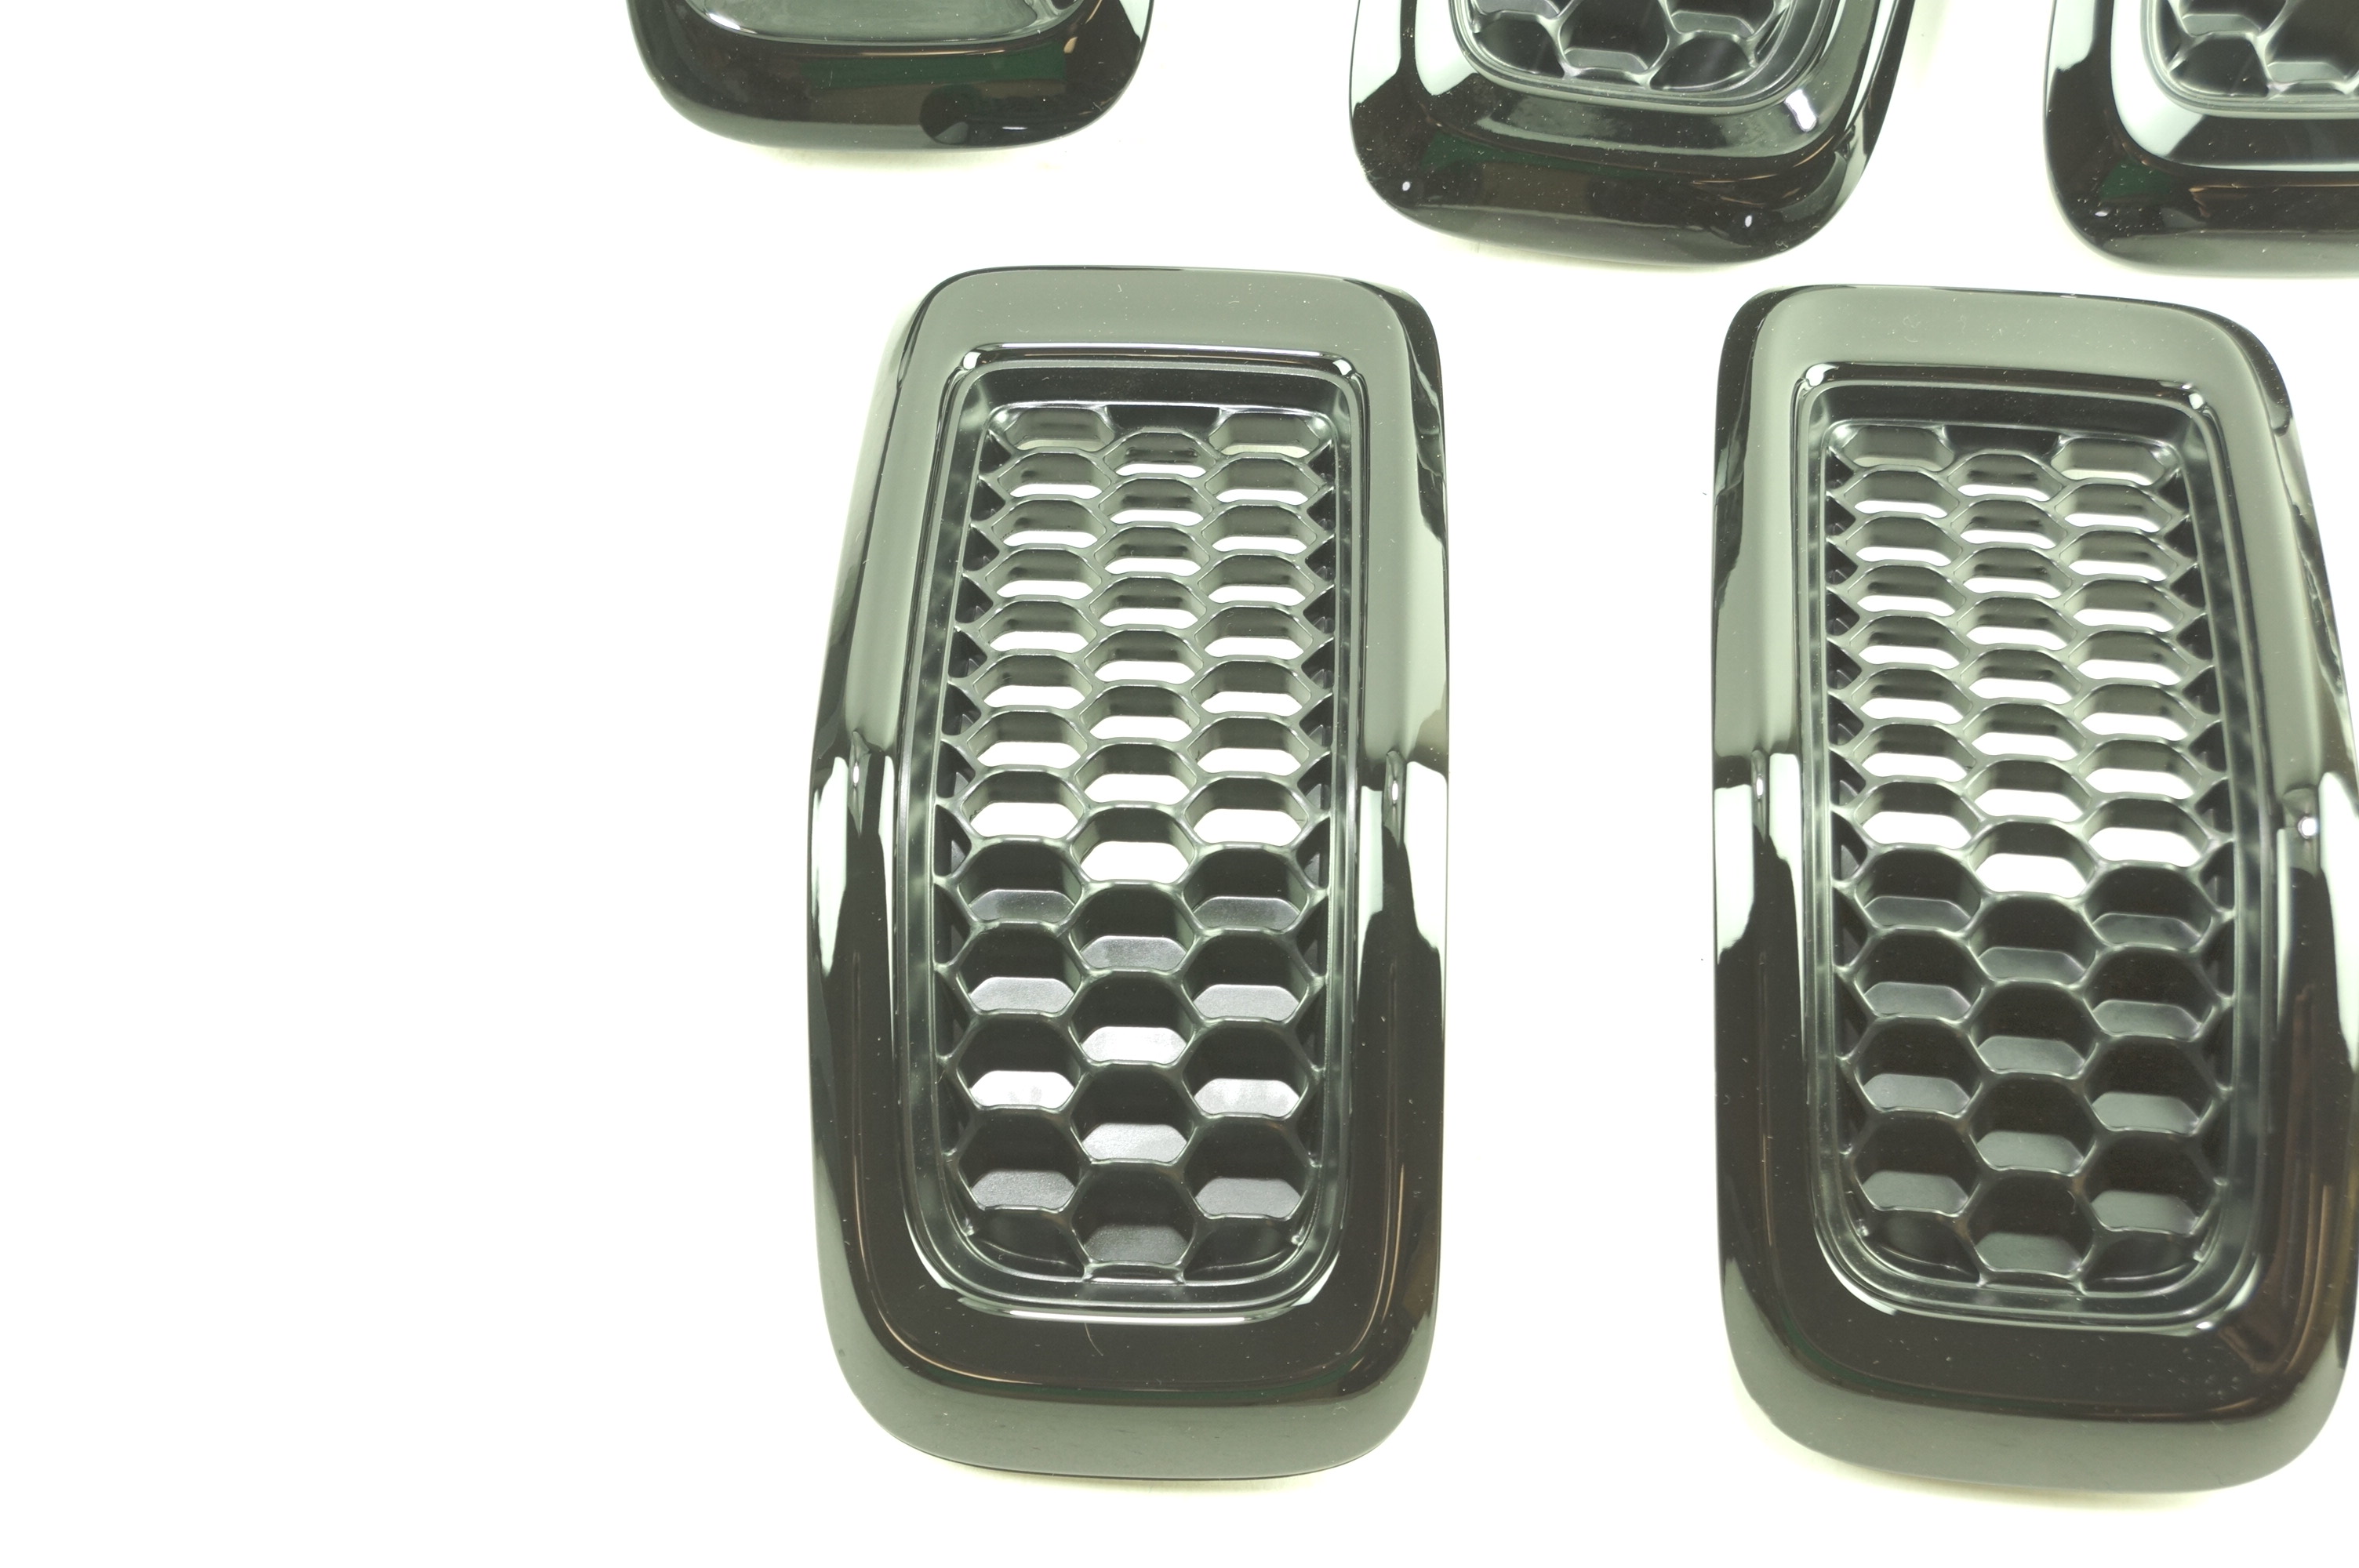 New OEM 6CY39DX8-AC Mopar 14-18 Jeep Cherokee Gloss Black Front Grille Inserts - image 2